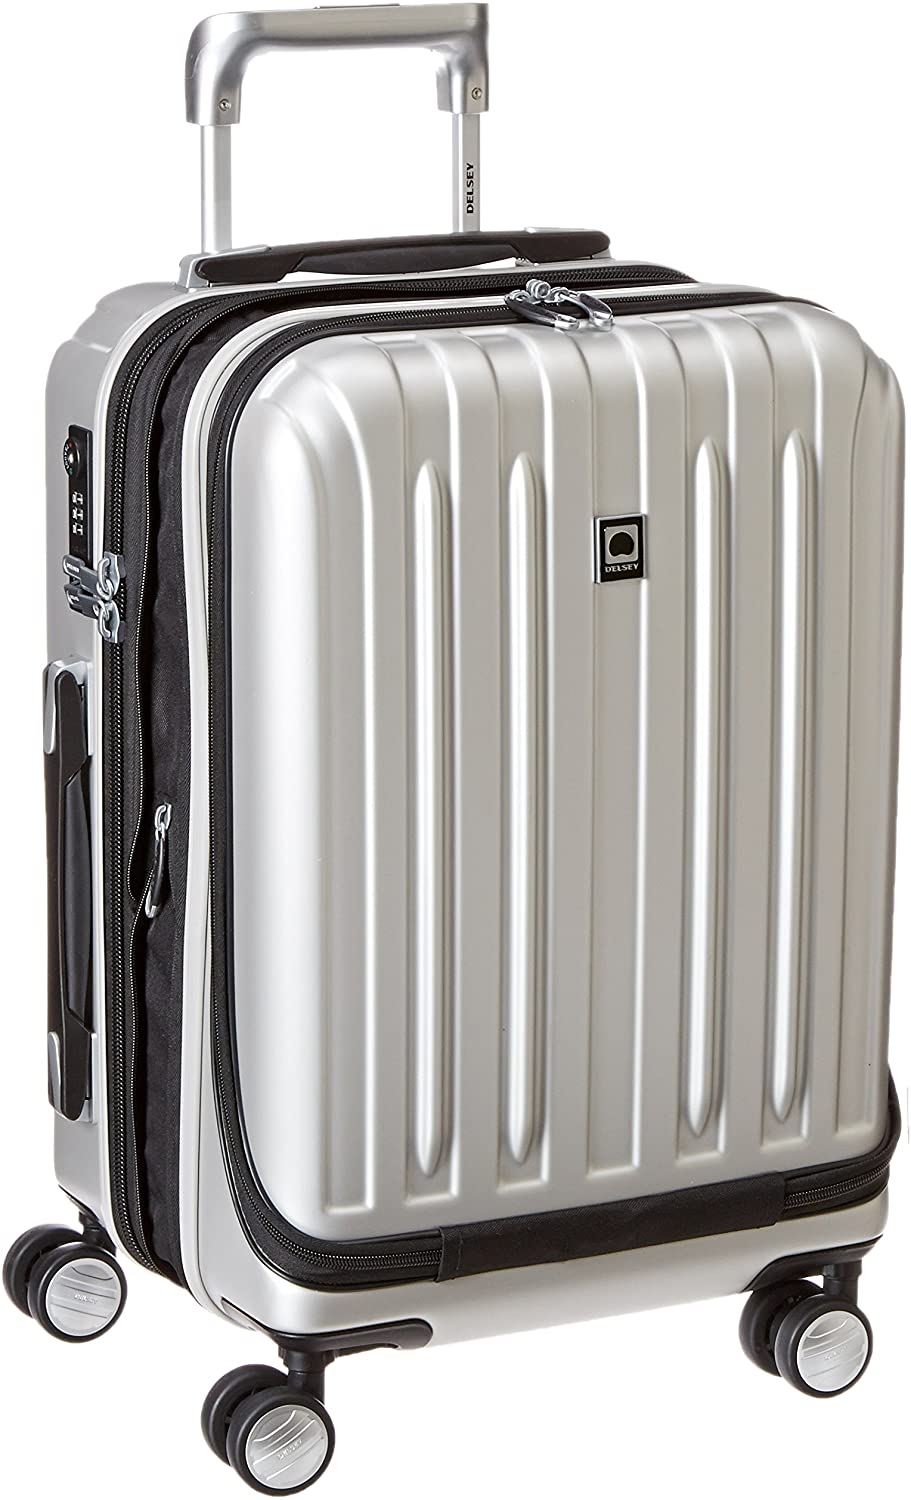 Acbags Hardside Expandable Luggage with Spinner Wheels, Silver, Carry-On 19 Inch